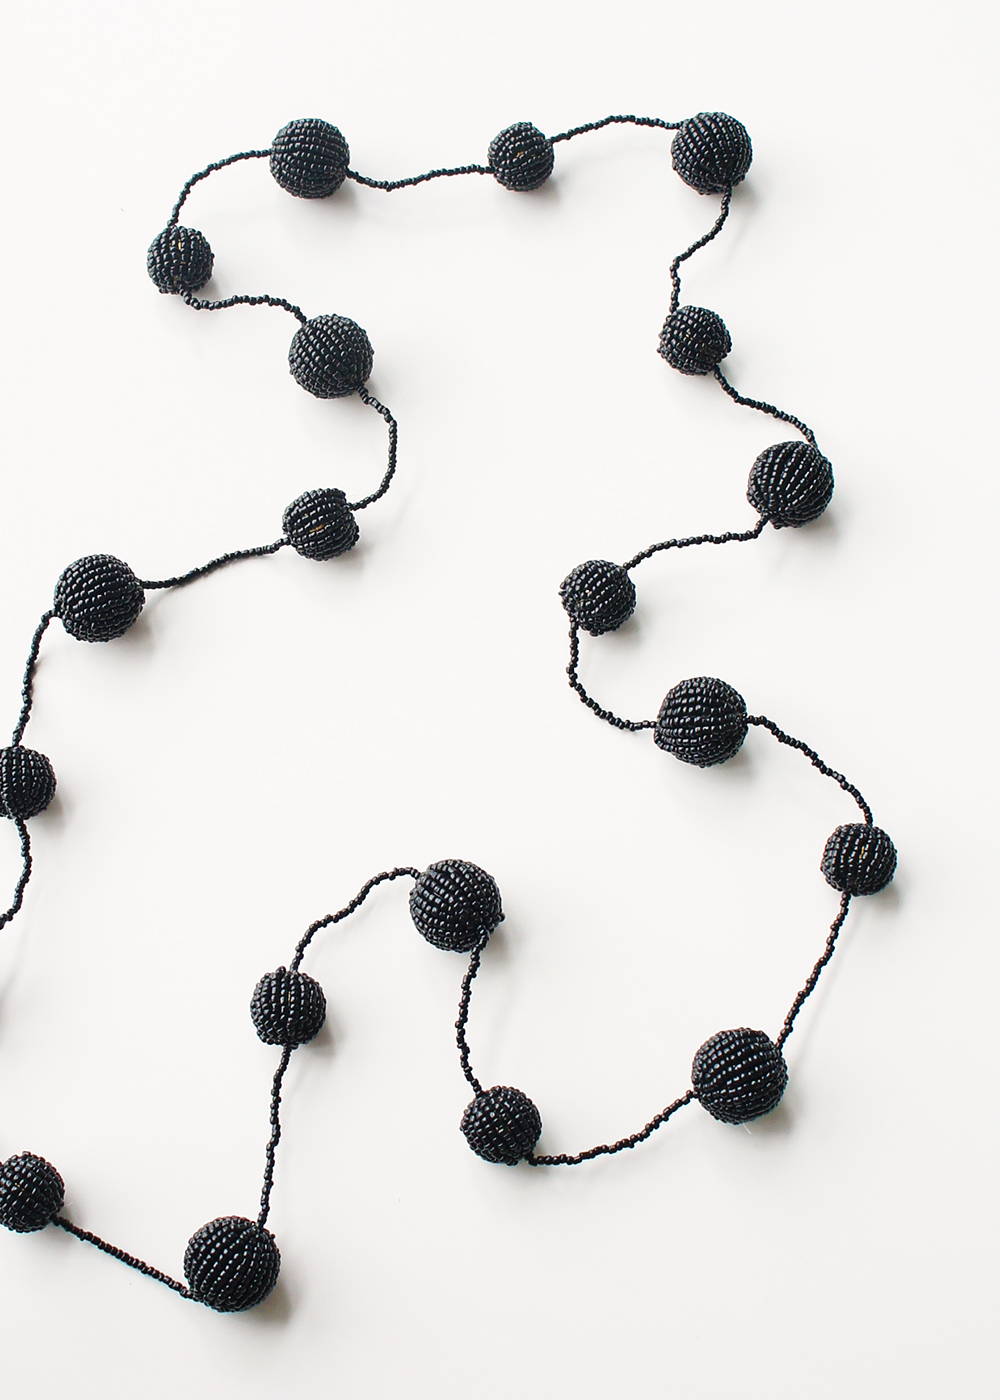 A black beaded necklace with large black spheres